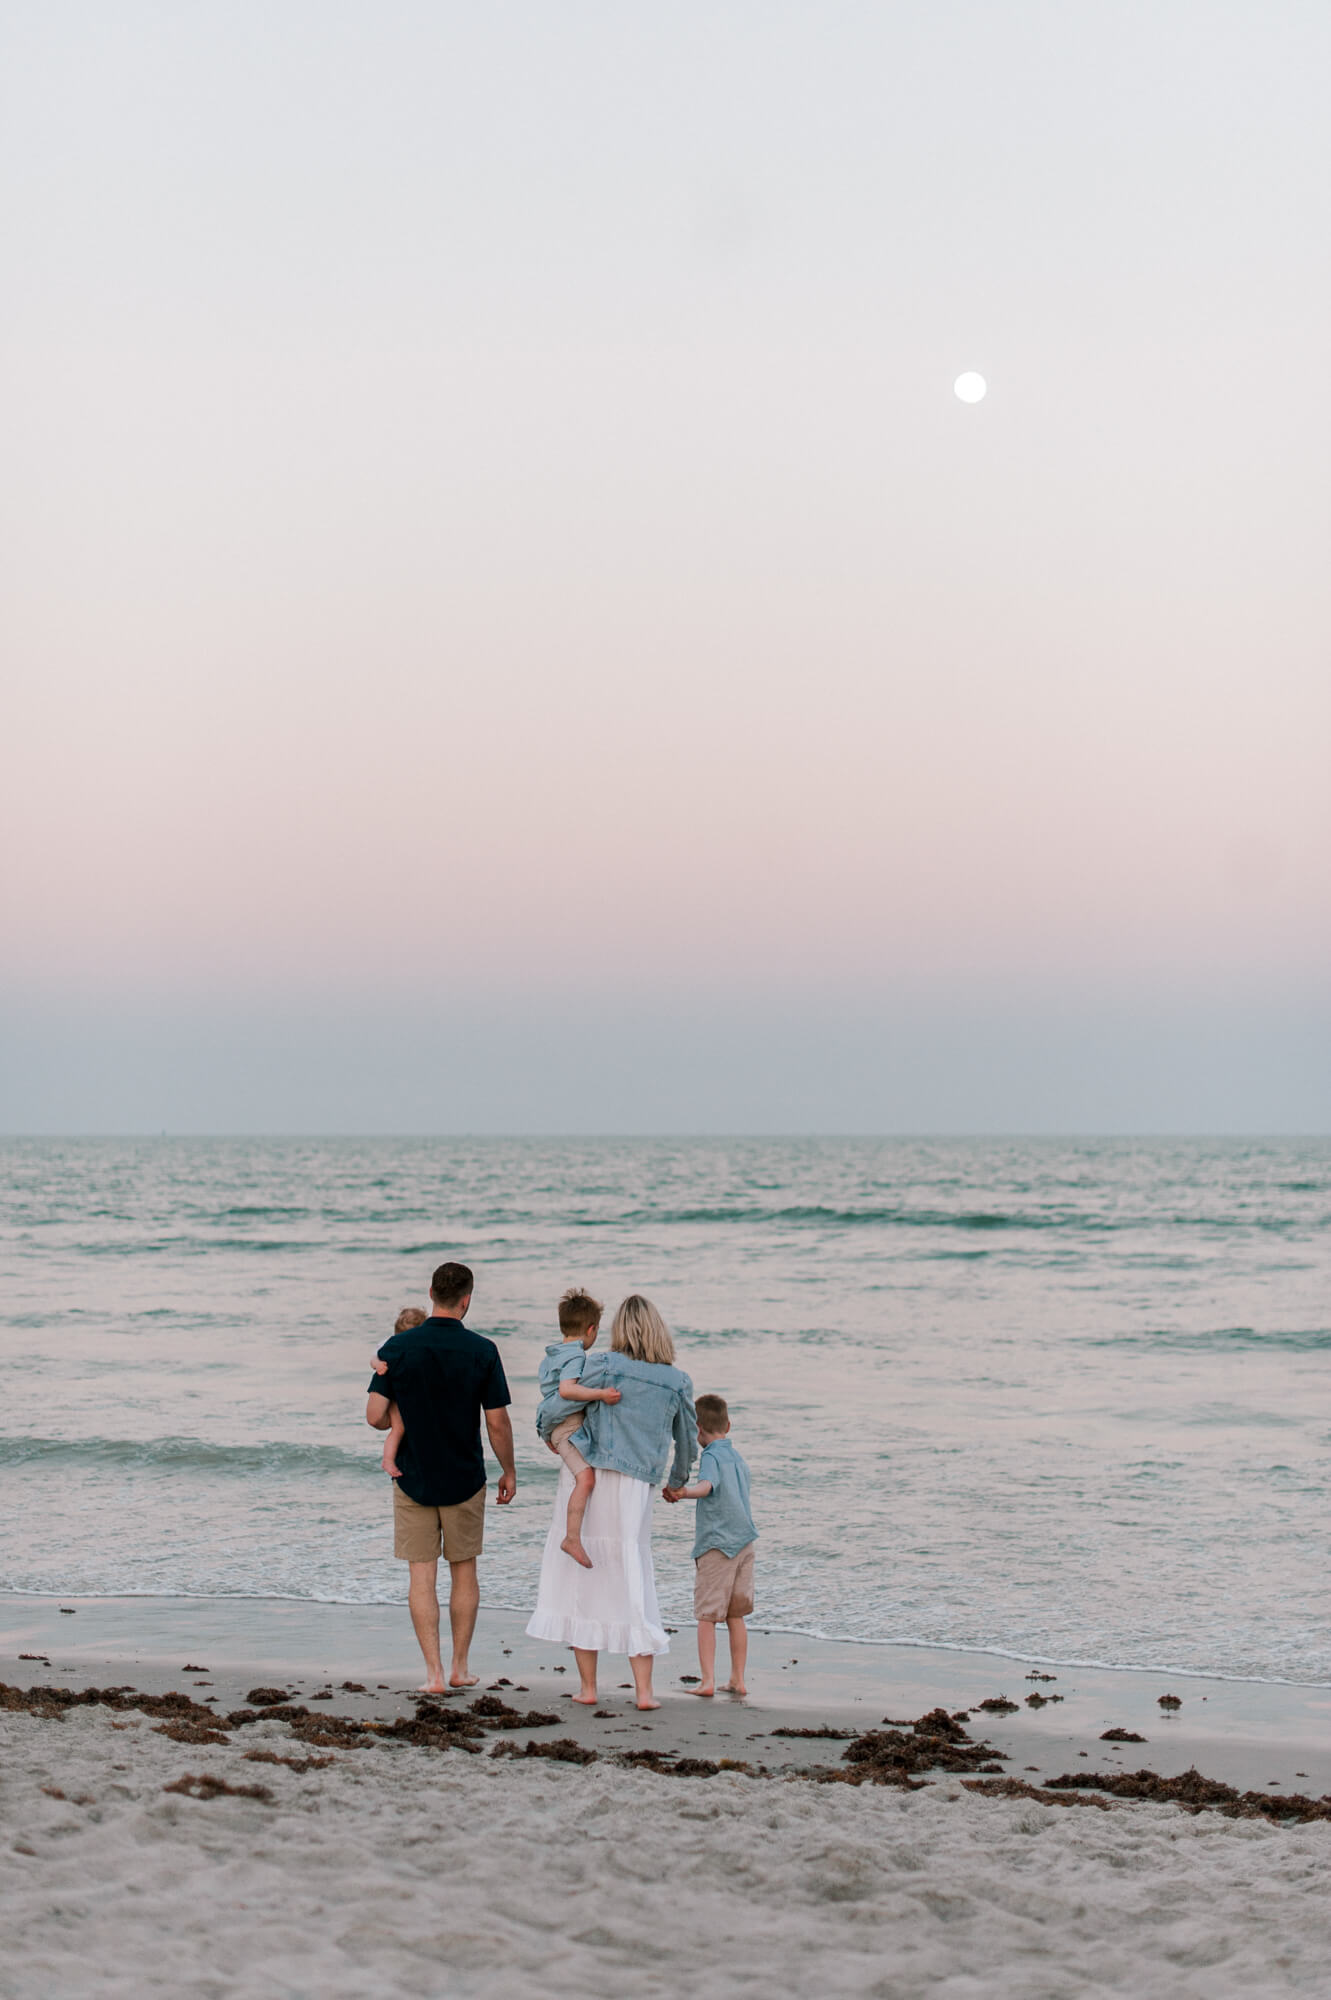 Family watching the waves and looking at the moon at sunset on Cocoa Beach. Viera Pediatric Dentistry would be a wonderful fit for their 3 children. 